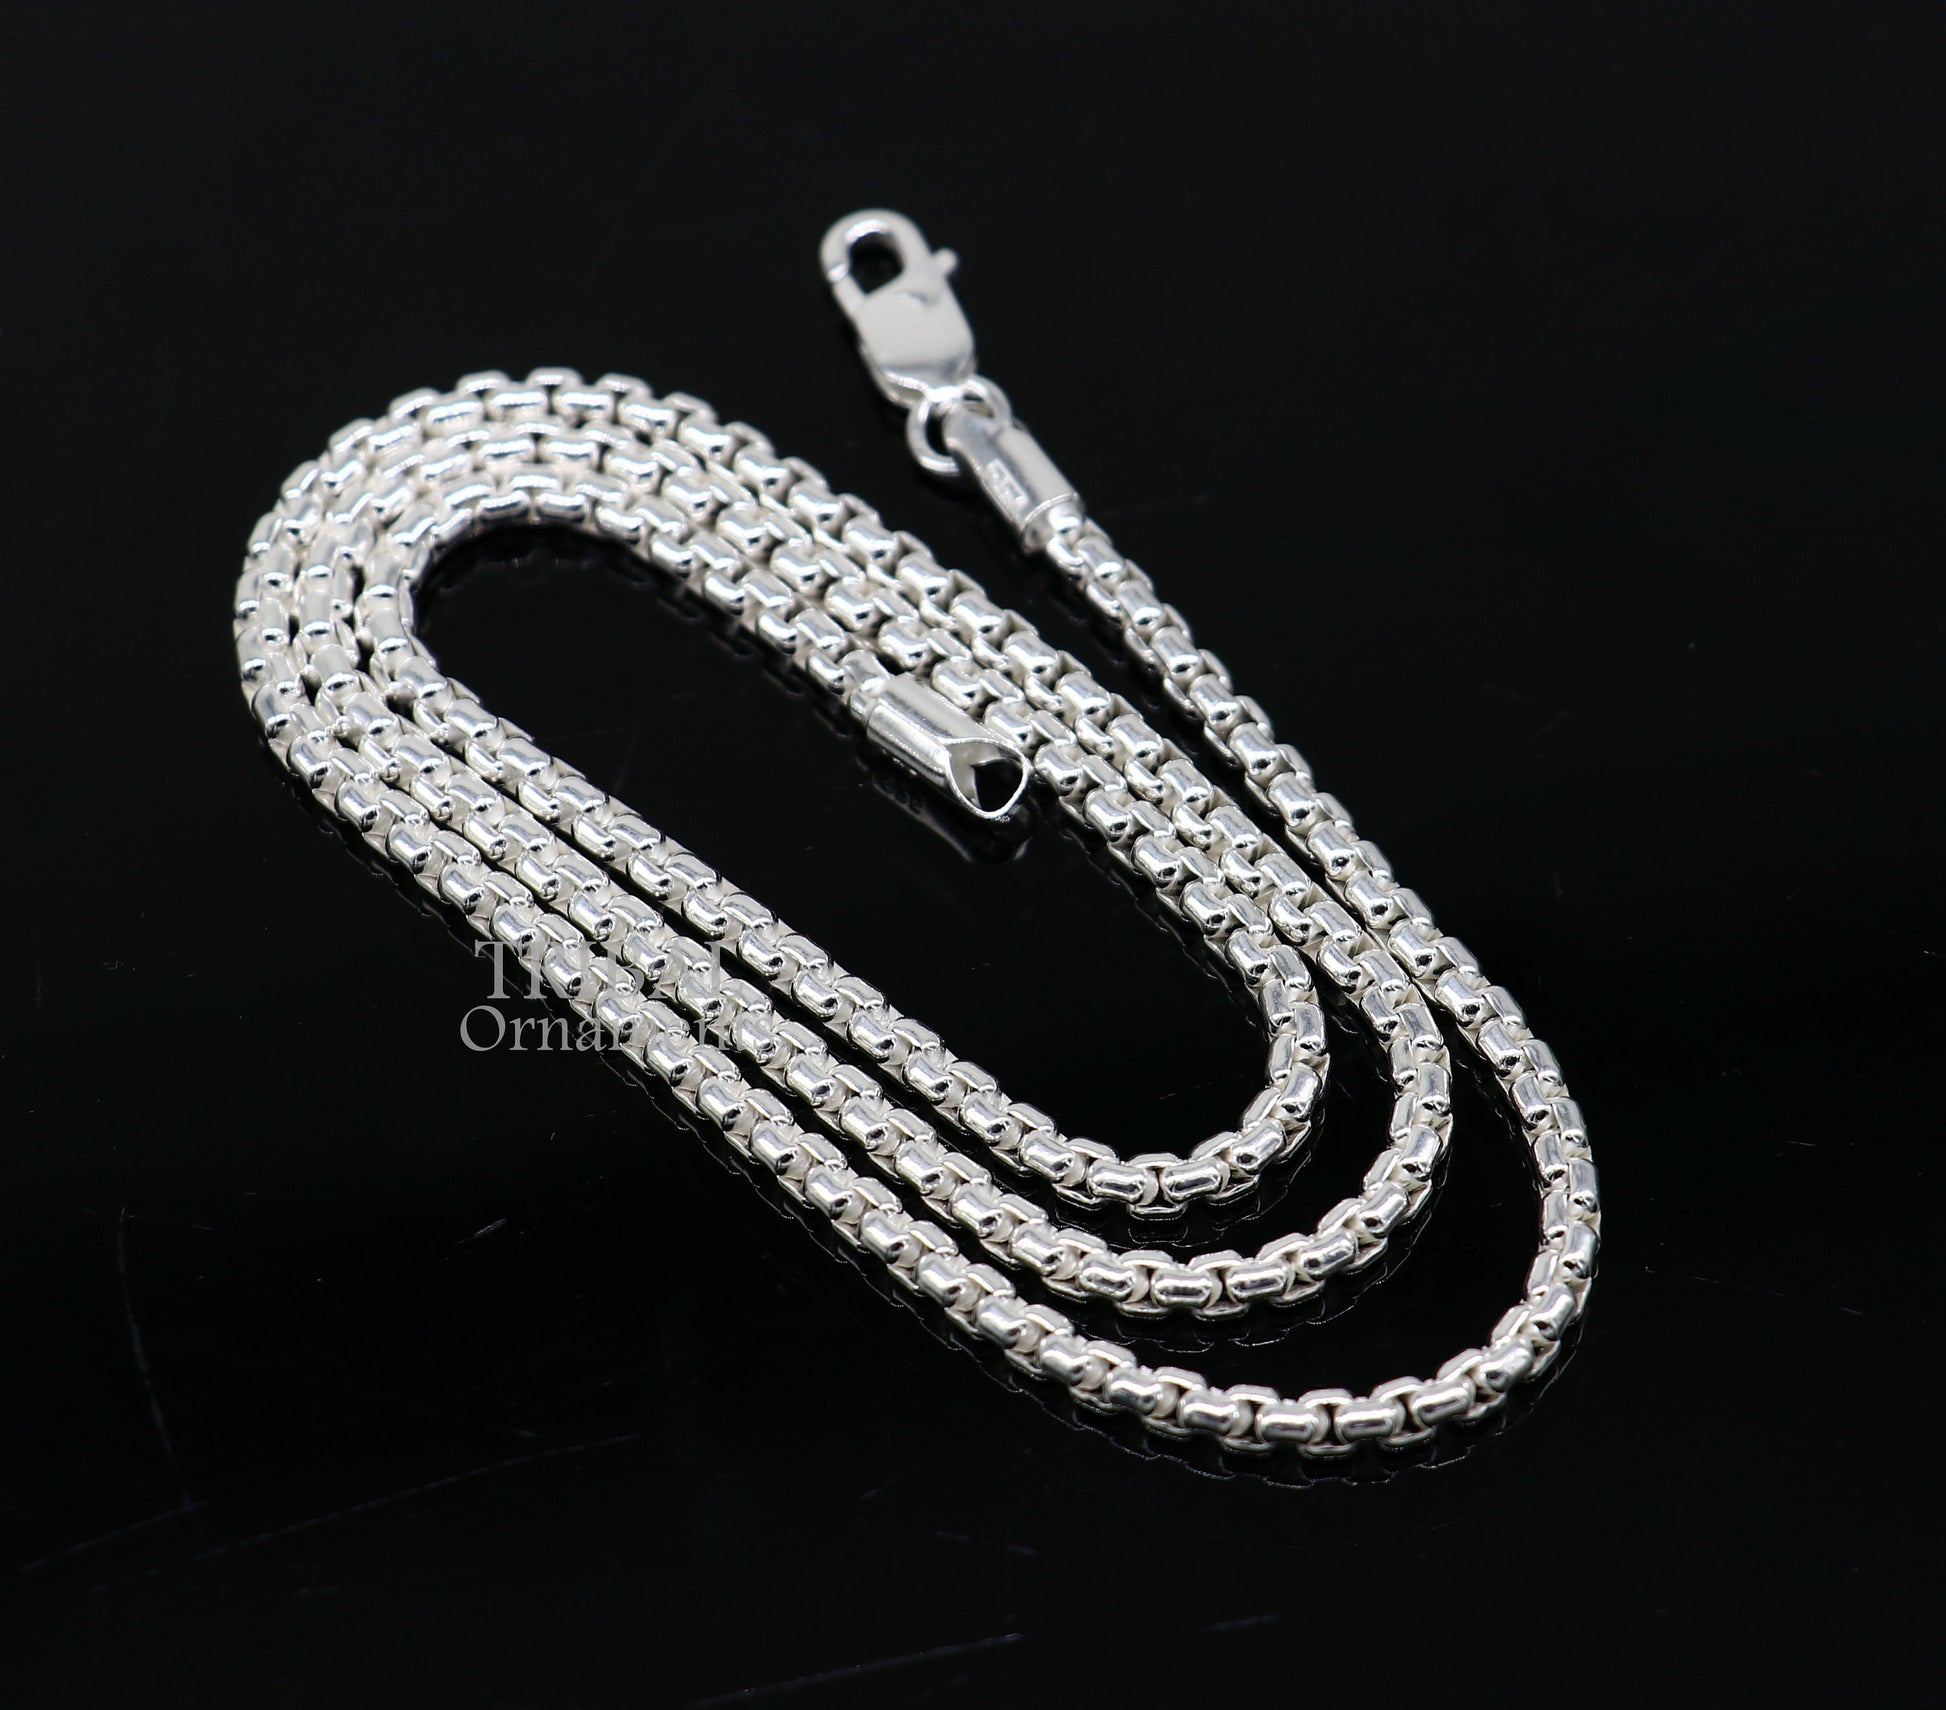 3mm 925 sterling silver handmade amazing stylish delicate solid Rolo high quality chains necklace, best gifting unisex necklace chain ch223 - TRIBAL ORNAMENTS